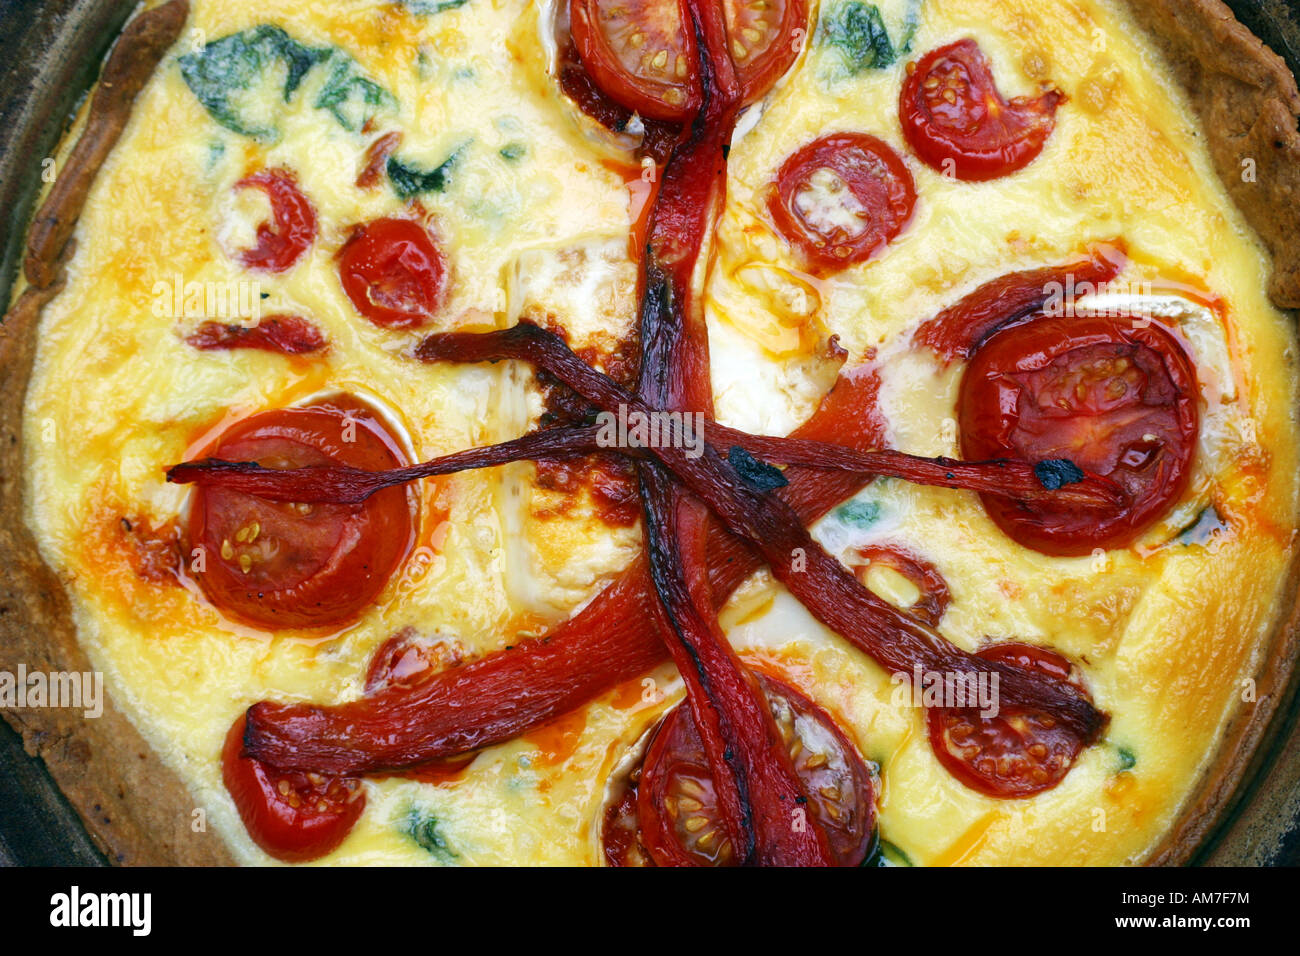 Quich is a baked flan or tart with a savory filling thickened with eggs. Stock Photo